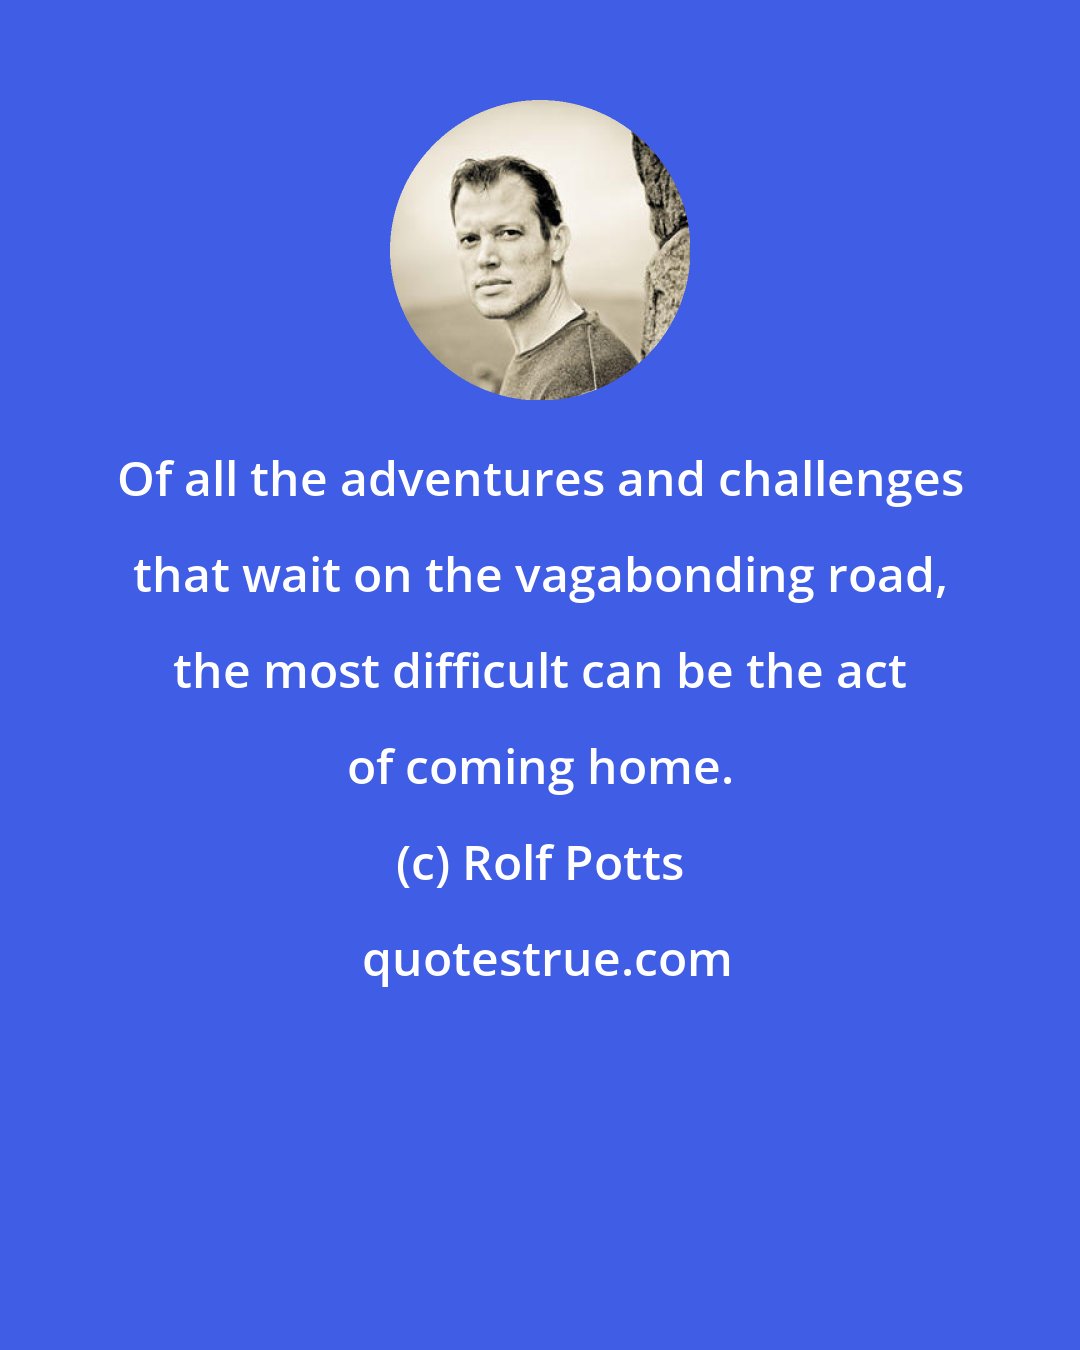 Rolf Potts: Of all the adventures and challenges that wait on the vagabonding road, the most difficult can be the act of coming home.